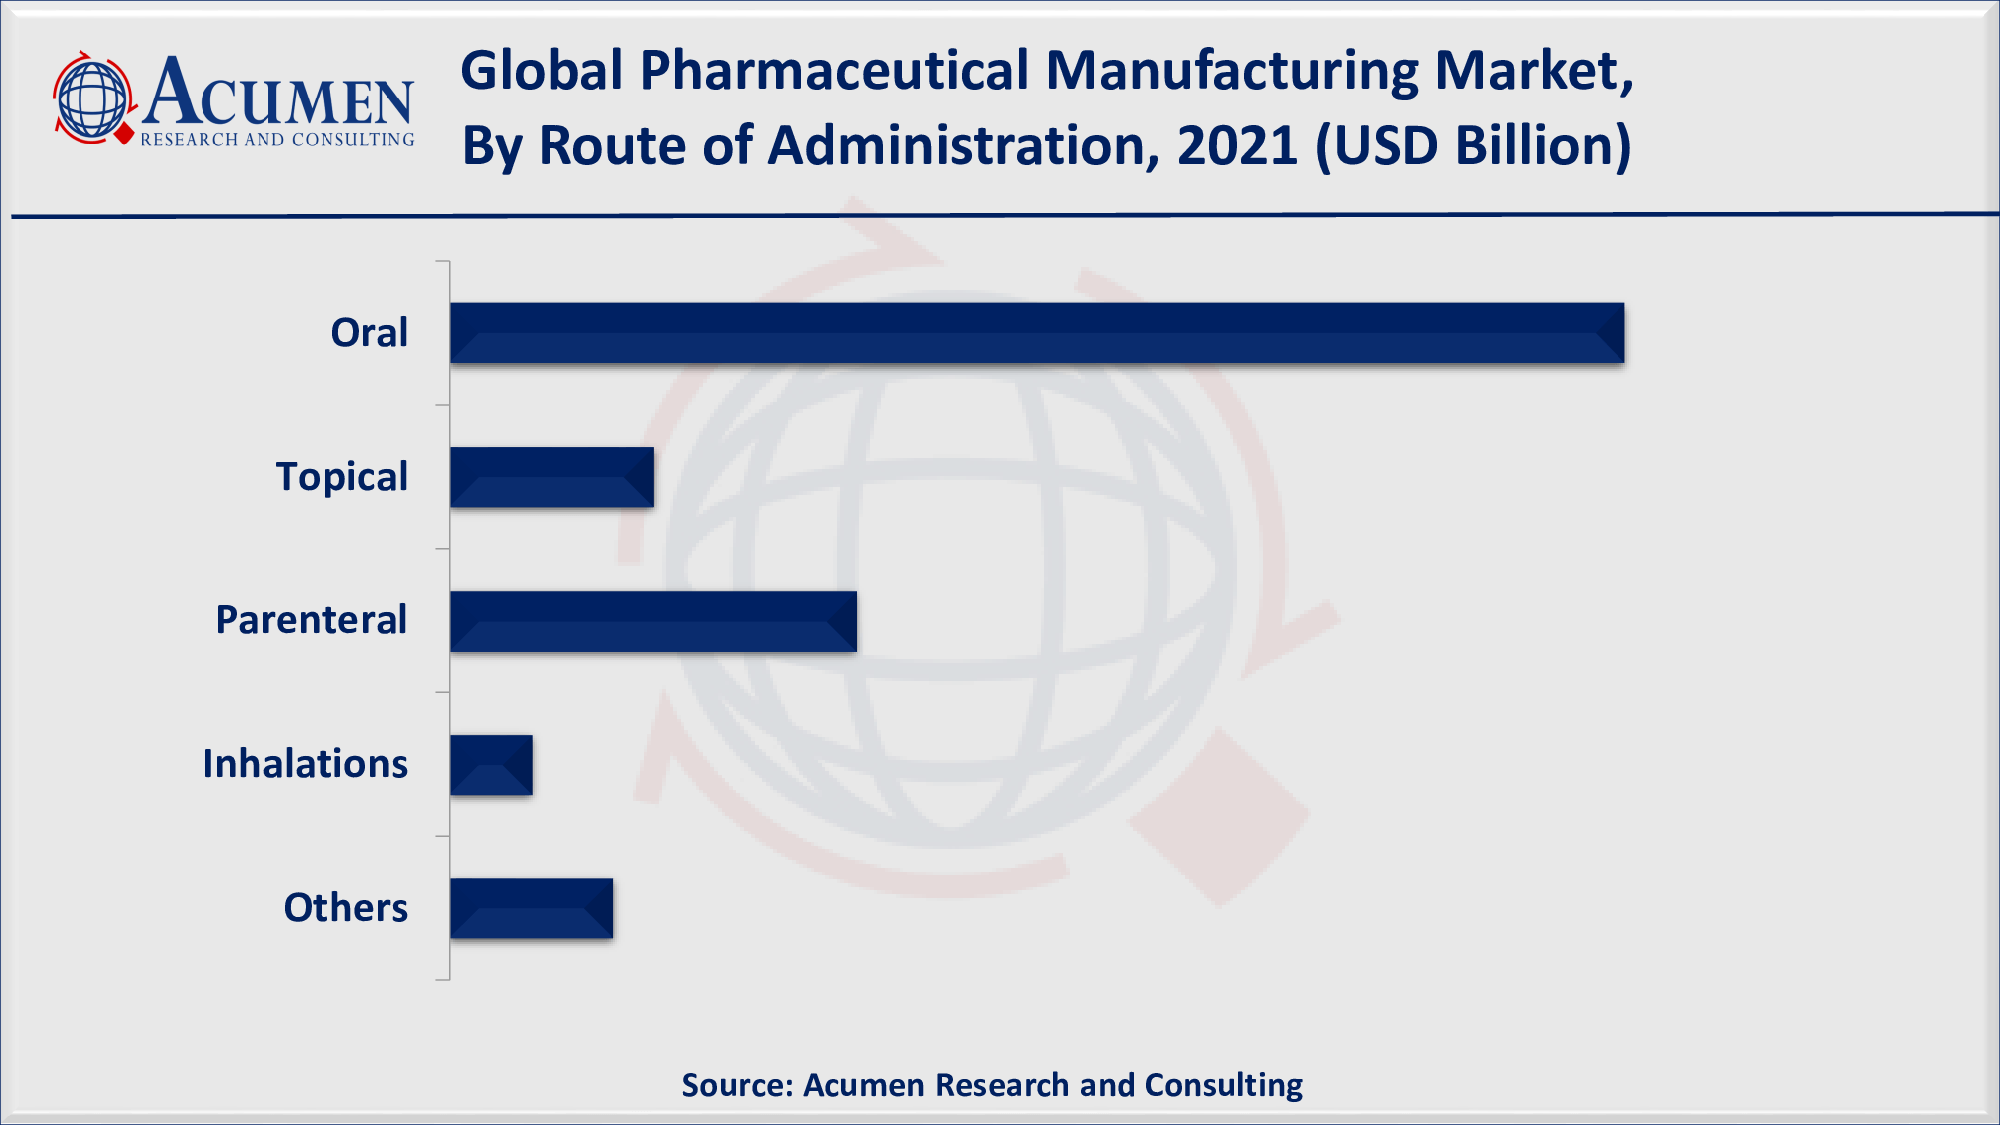 Growing elderly population fuels the pharmaceutical manufacturing market growth